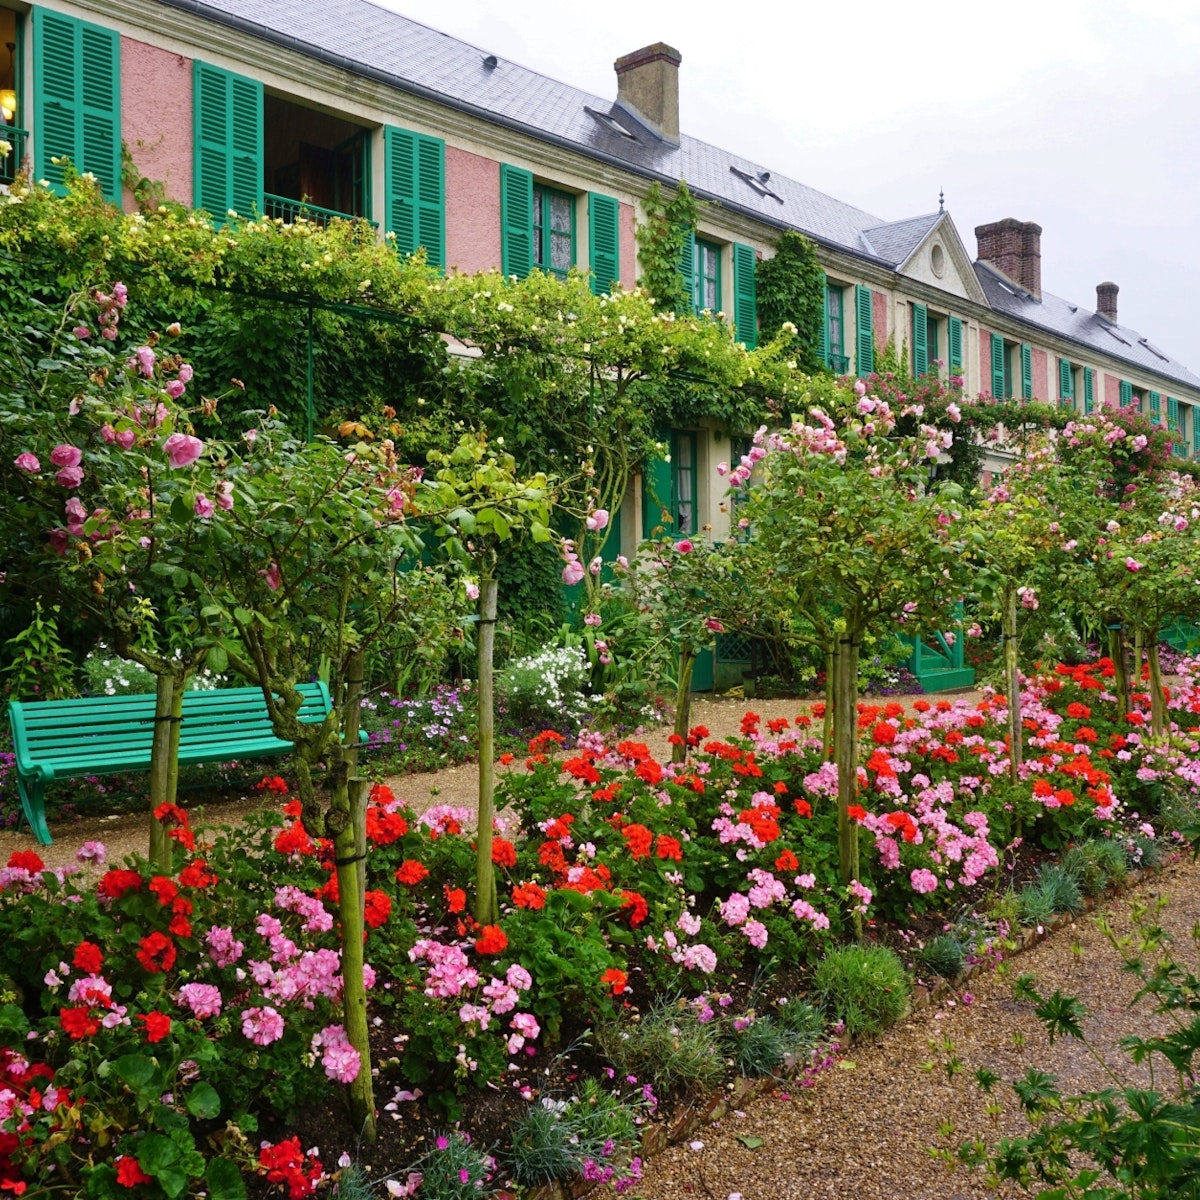 GIVERNY, FRANCE -3 JULY 2016- The house of French impressionist painter Claude Monet in Giverny is now a museum. It includes a beautiful garden with a nymphea waterlily pond and Japanese bridge.; Shutterstock ID 649707625; Your name (First / Last): Daniel Fahey; GL account no.: 65050; Netsuite department name: Online Editorial; Full Product or Project name including edition: Maison et Jardins de Claude Monet POI